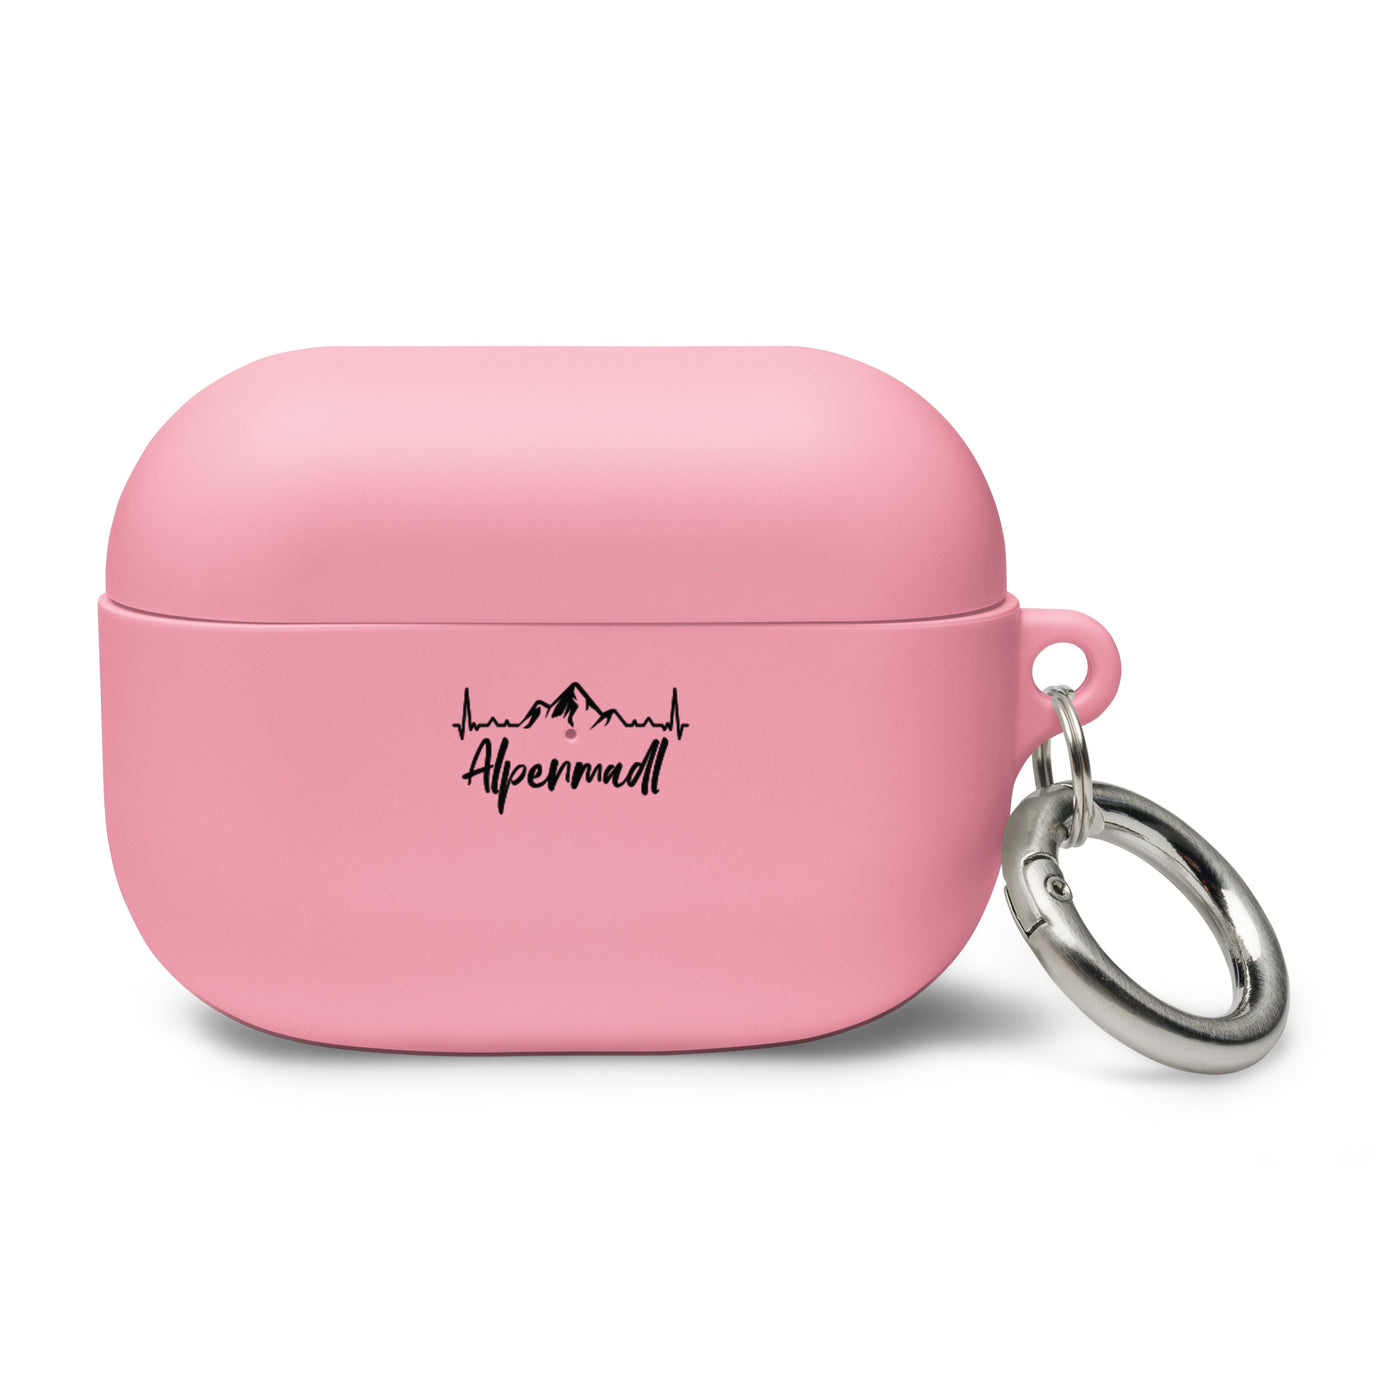 Alpenmadl 1 - AirPods Case berge Pink AirPods Pro